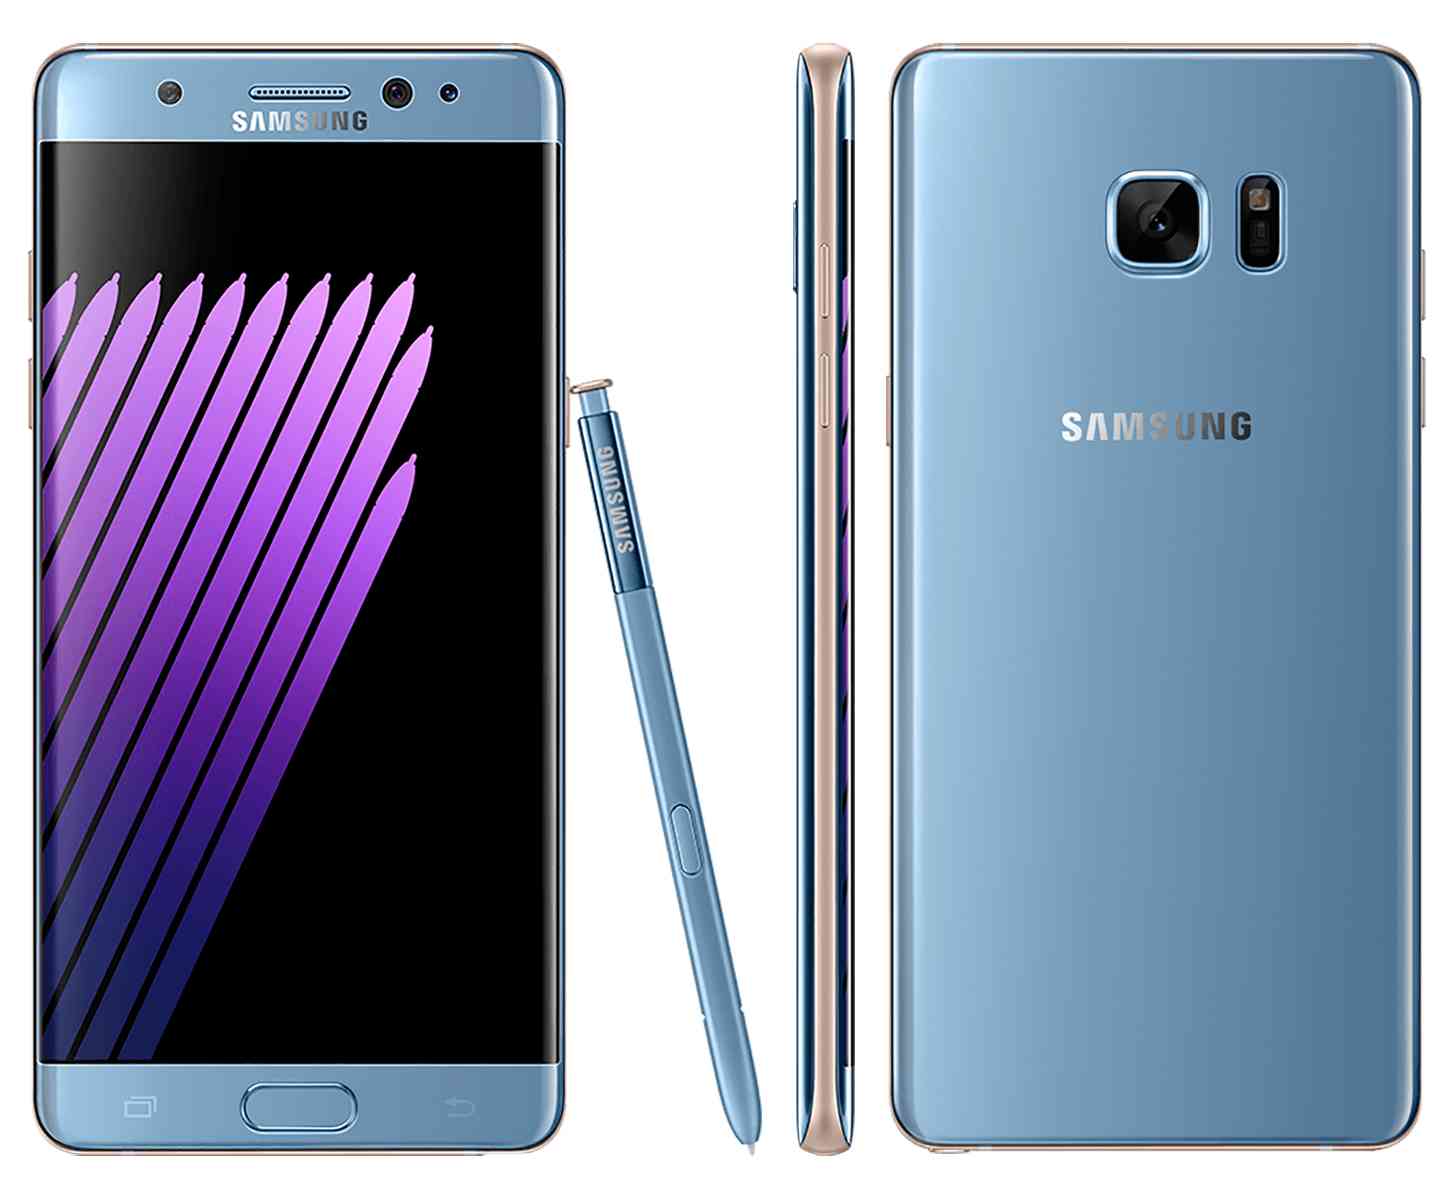 Samsung Galaxy Note 7 Blue Coral official